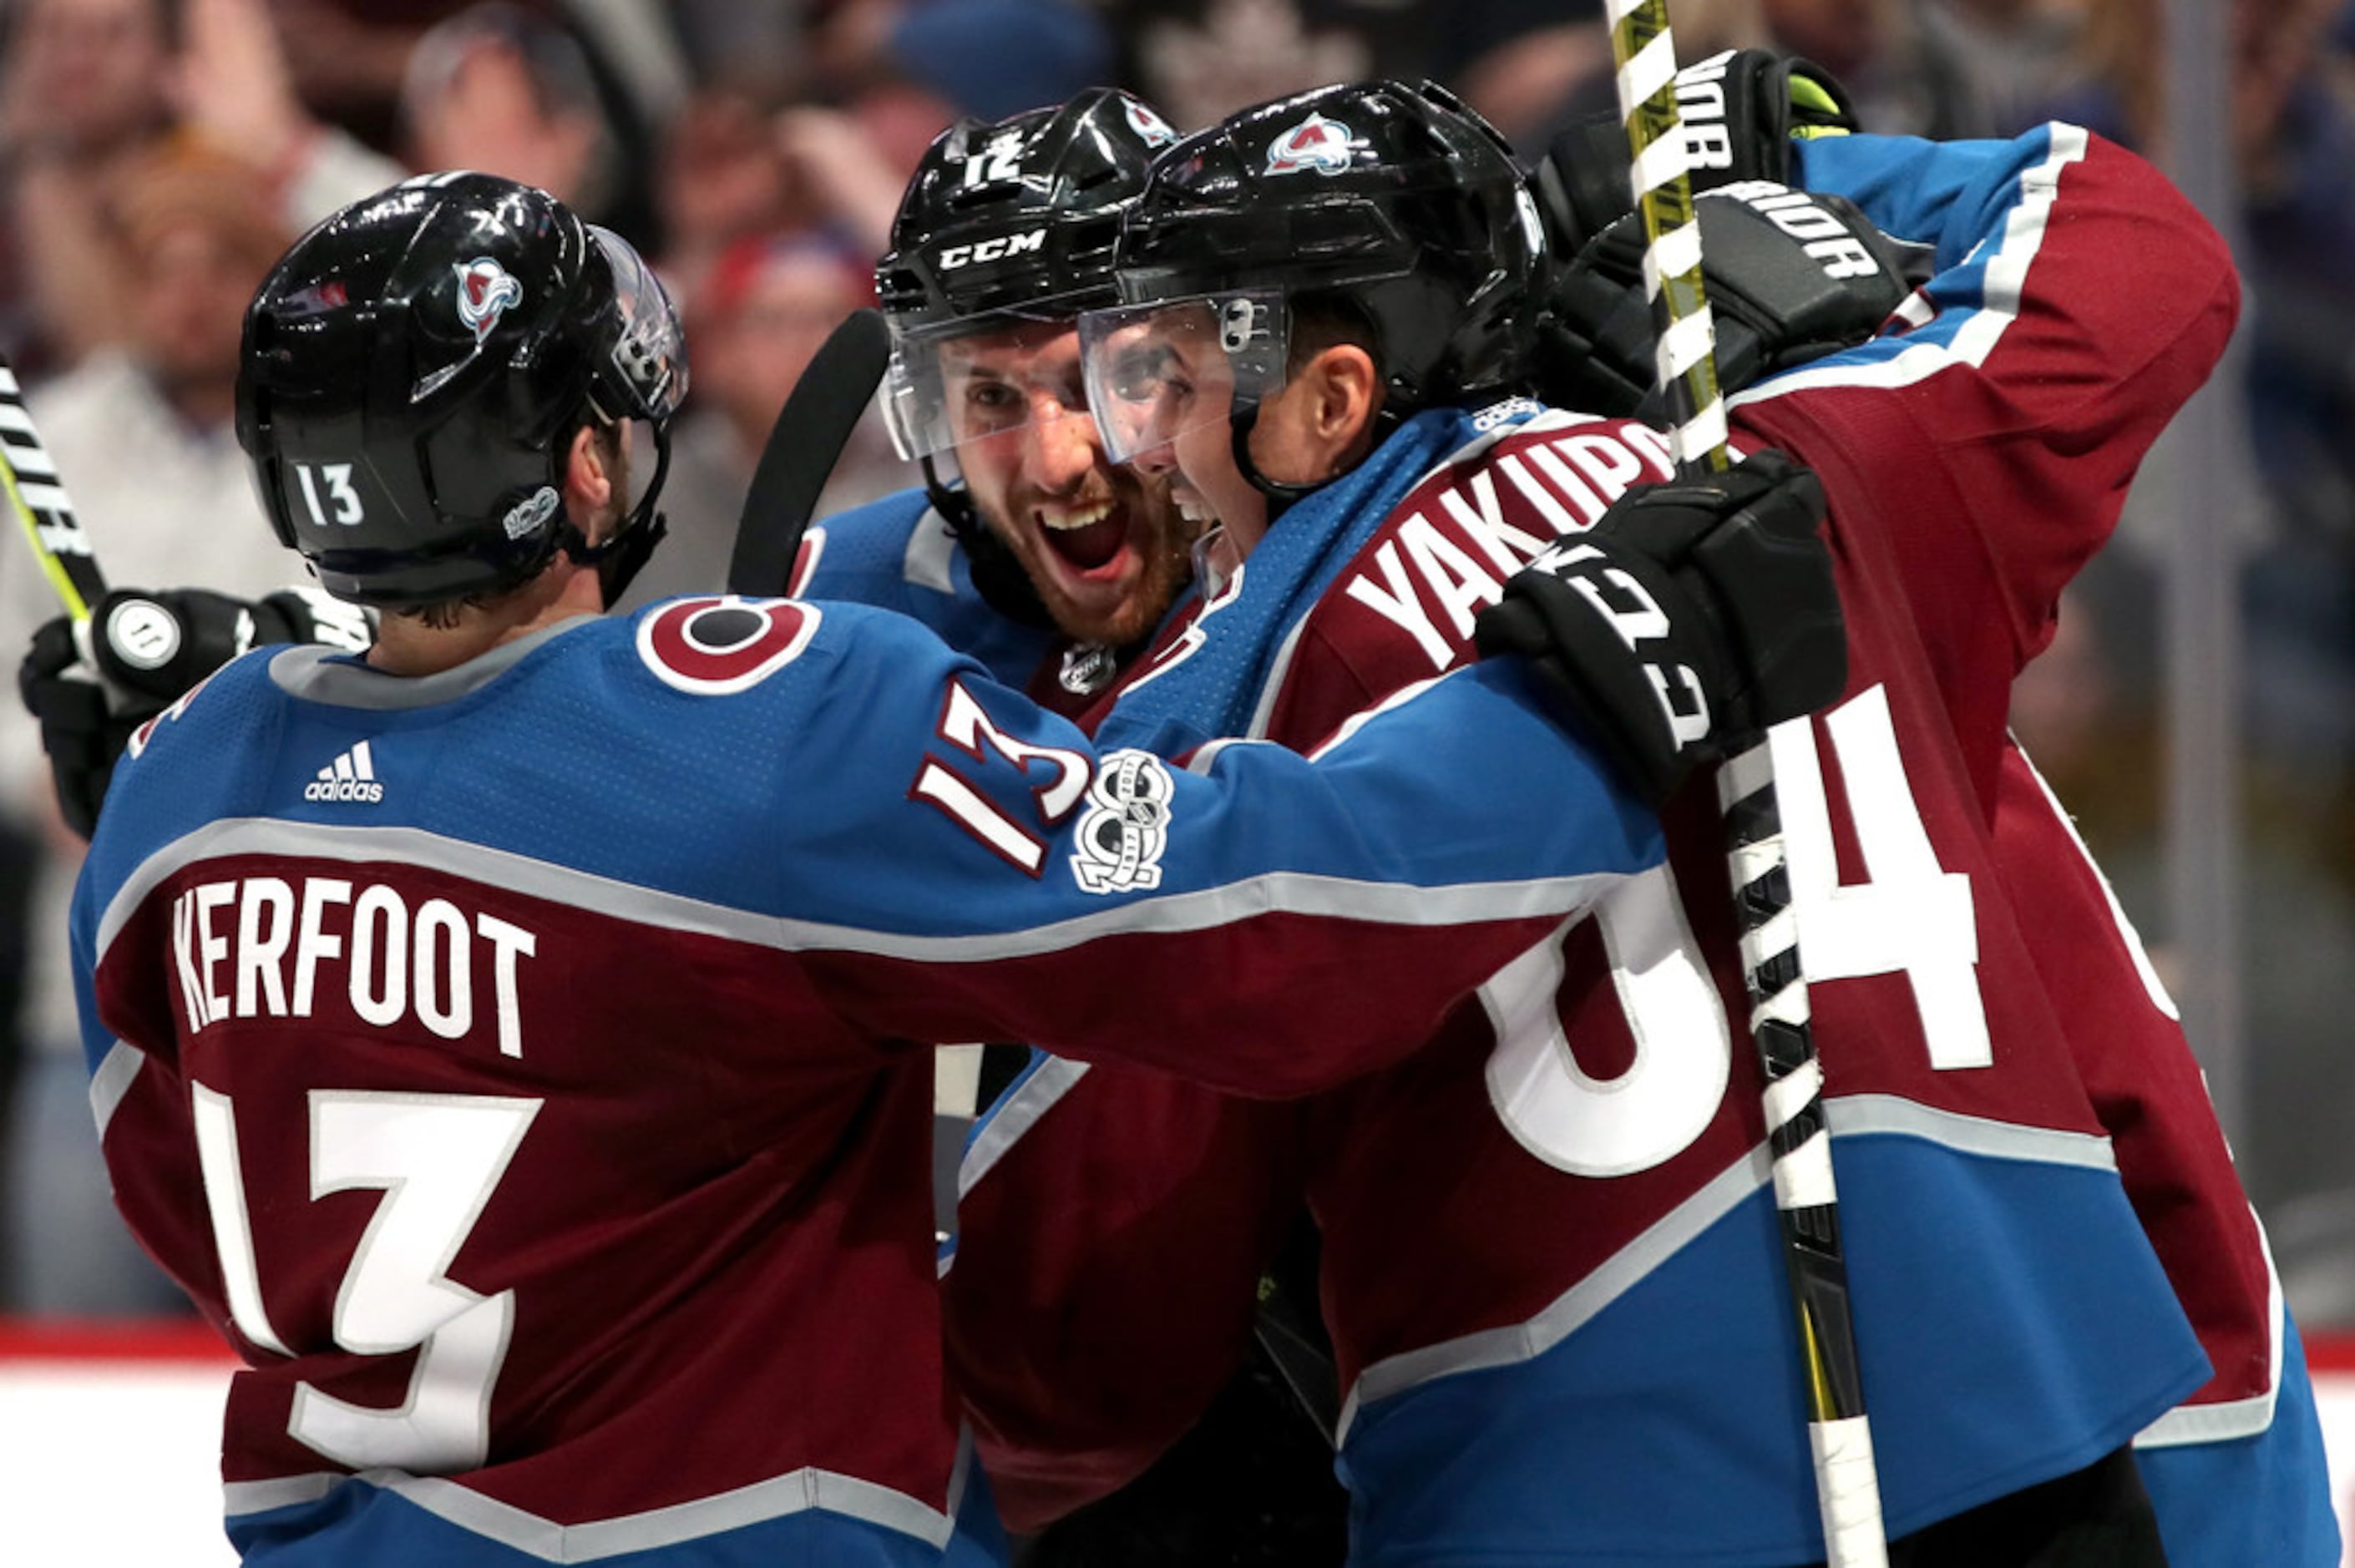 Alexander Kerfoot was always smiling, - Colorado Avalanche